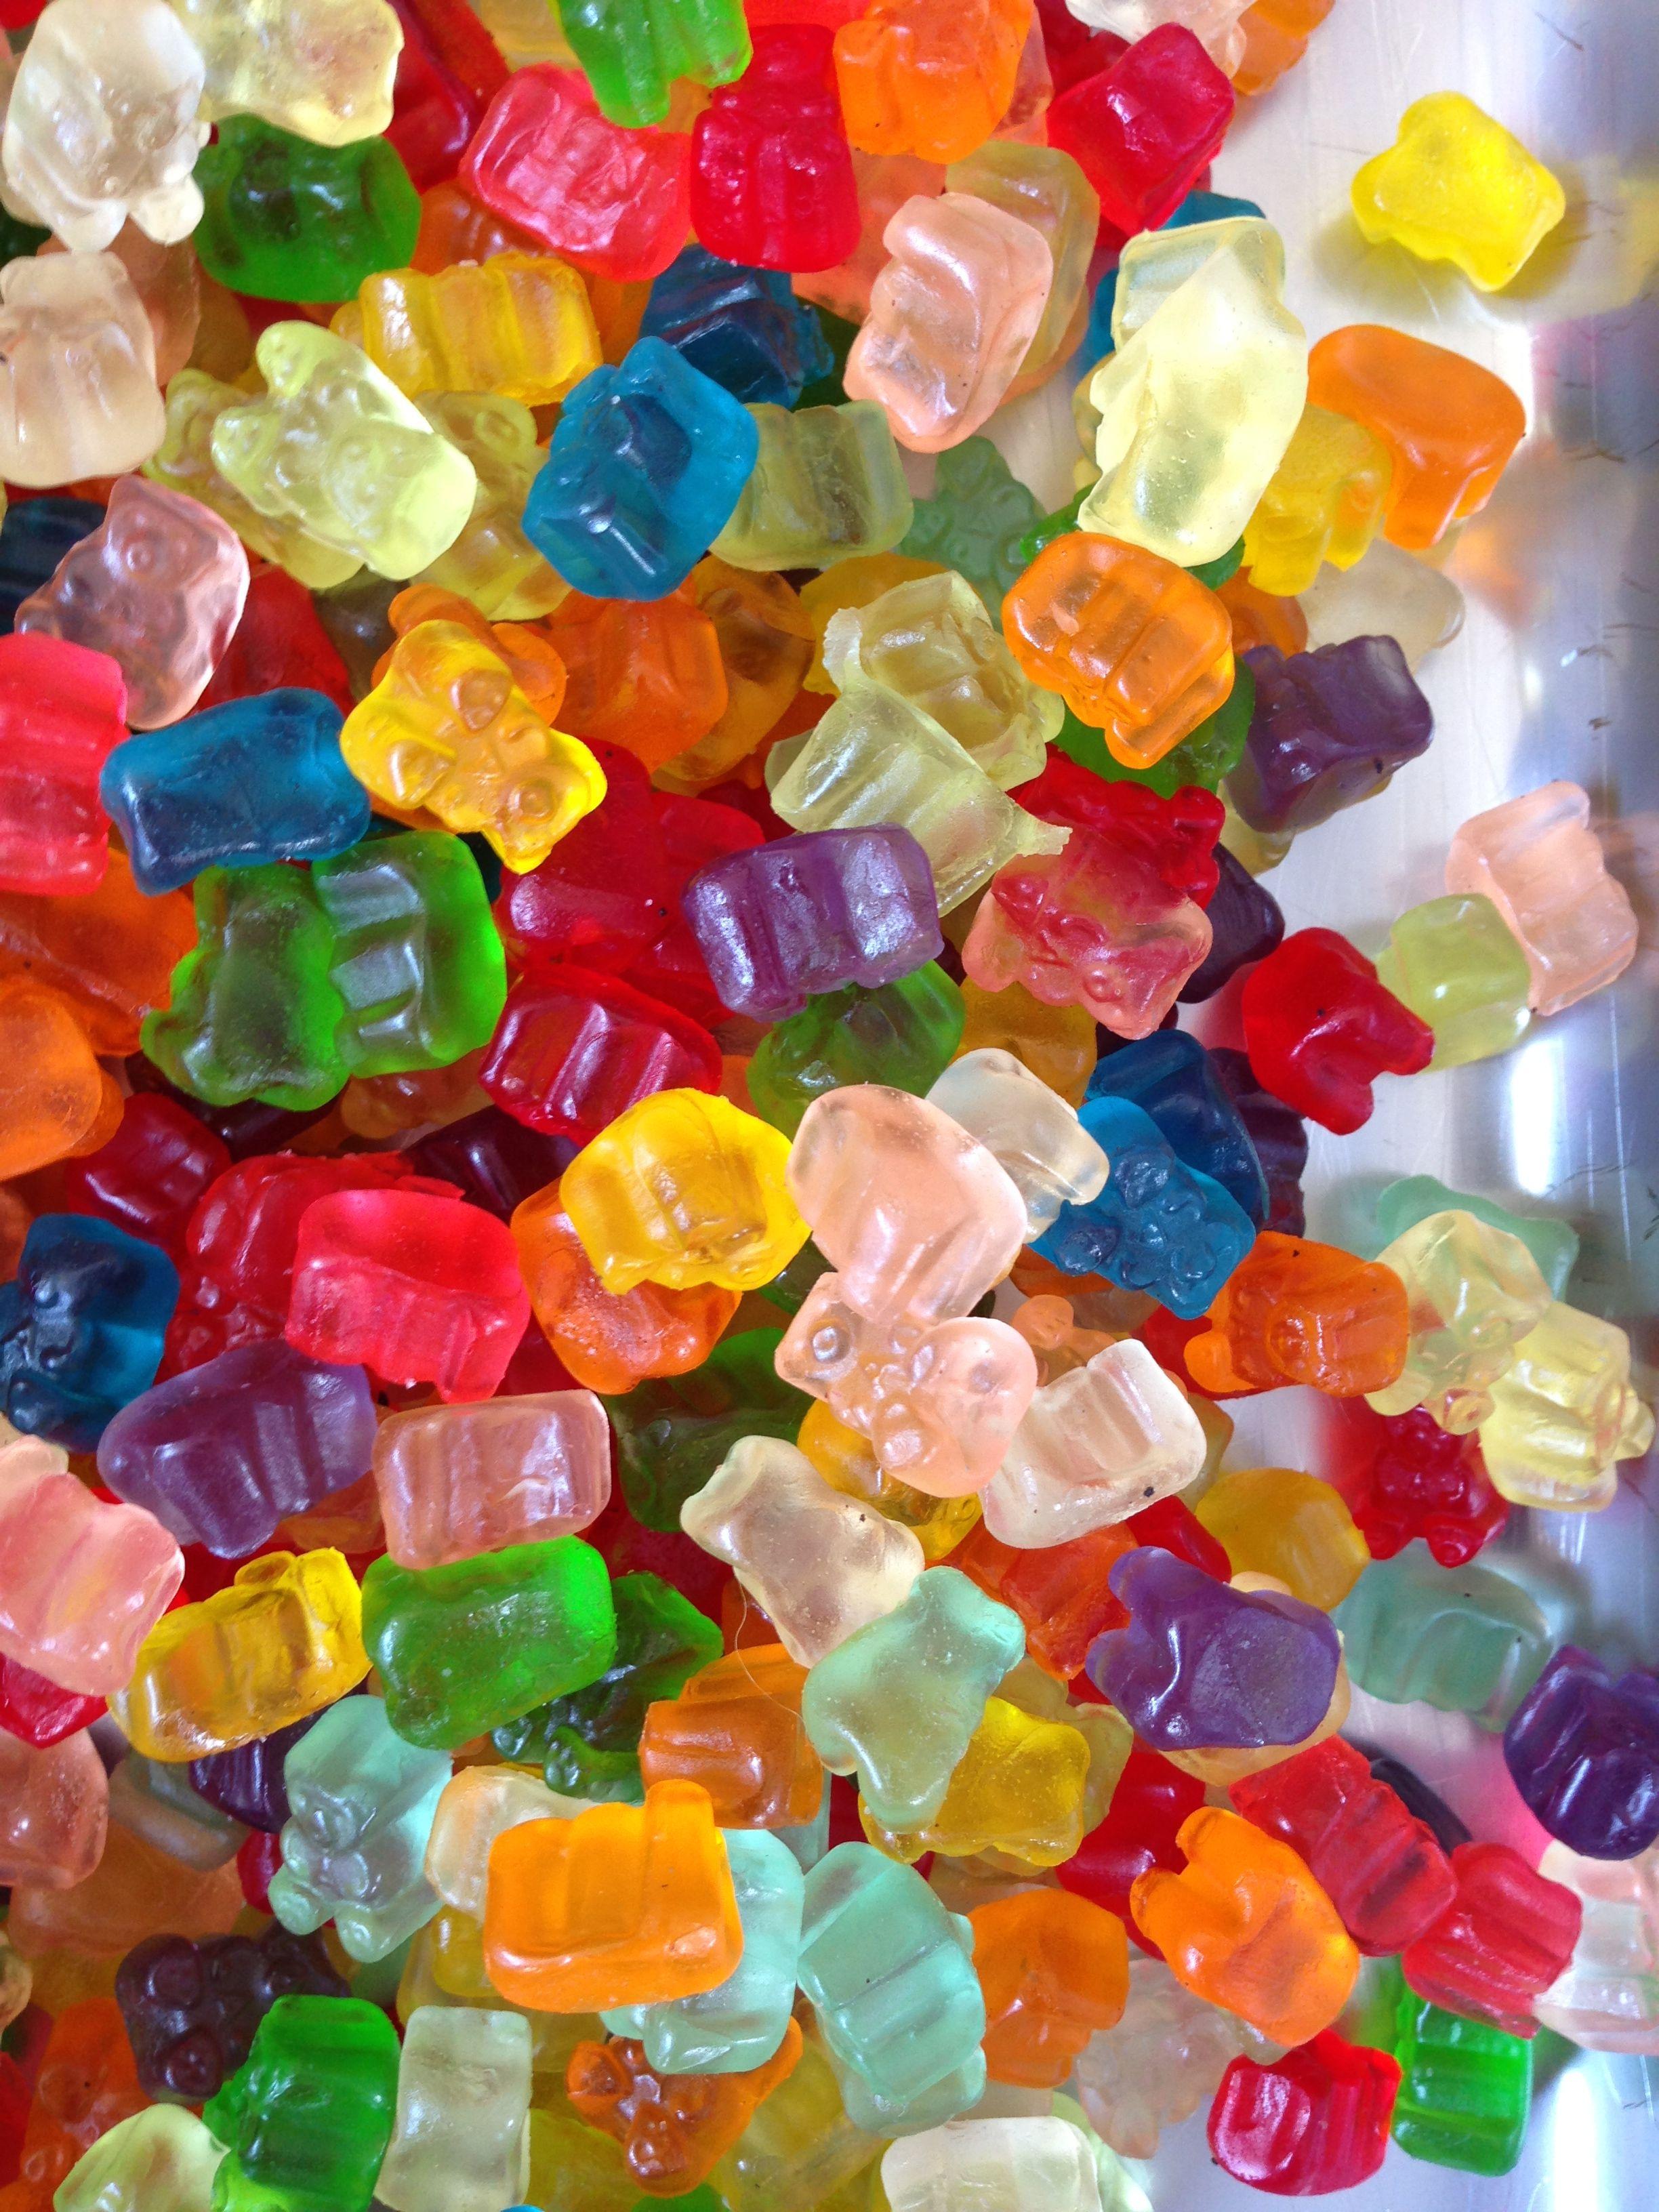 Gummy bears!. Candy photography, Colorful candy, Gummy bears